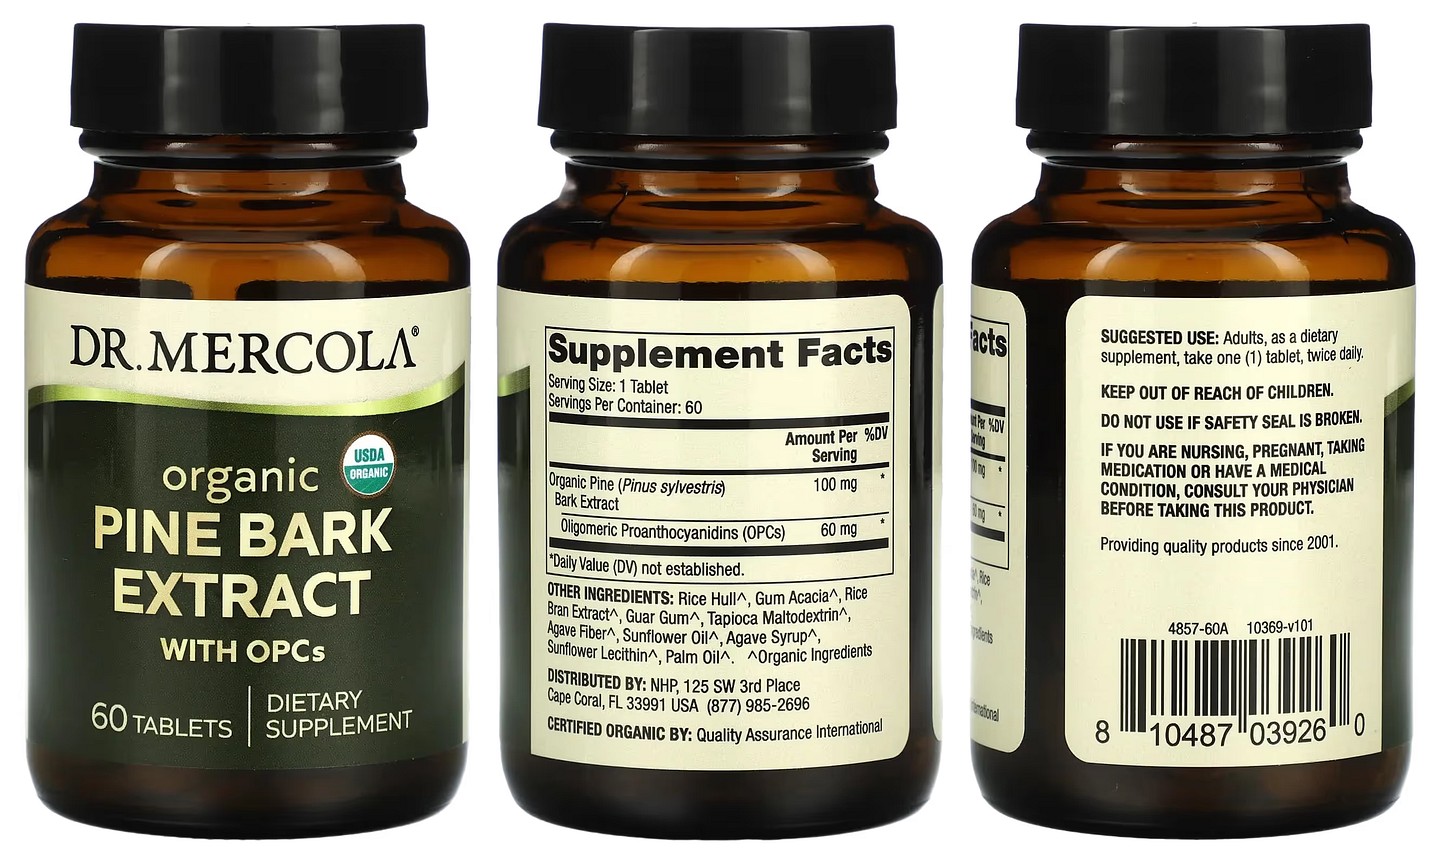 Dr. Mercola, Organic Pine Bark Extract with OPCs packaging